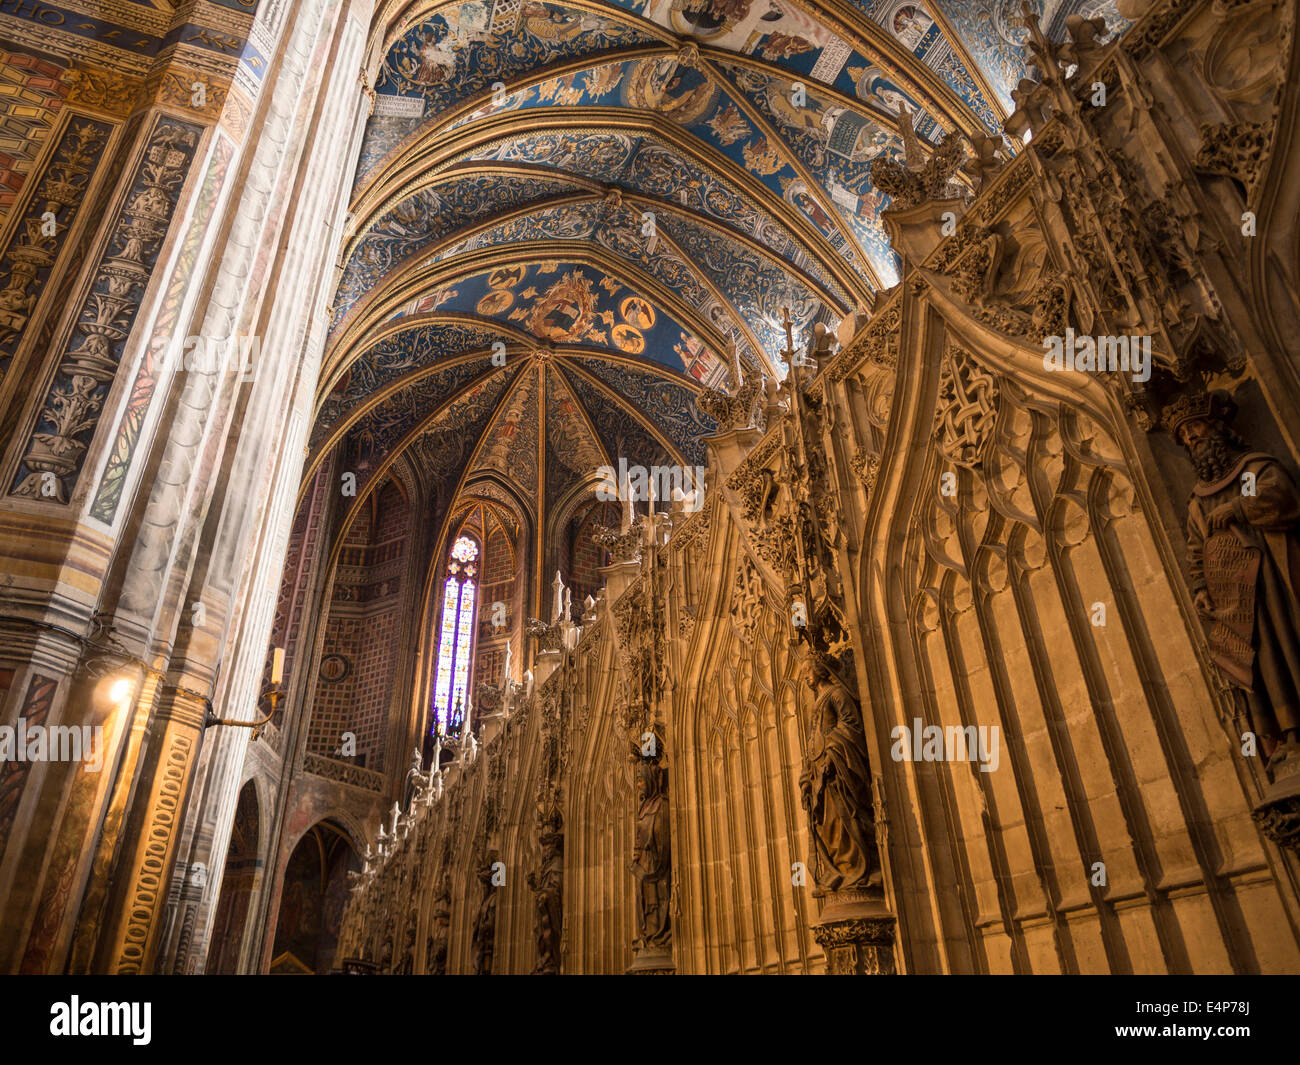 Choir Enclosure and Ornate Ceiling of Albi Cathedral. The rear of the massive cathedral in Albi with an elaborately carved choir Stock Photo